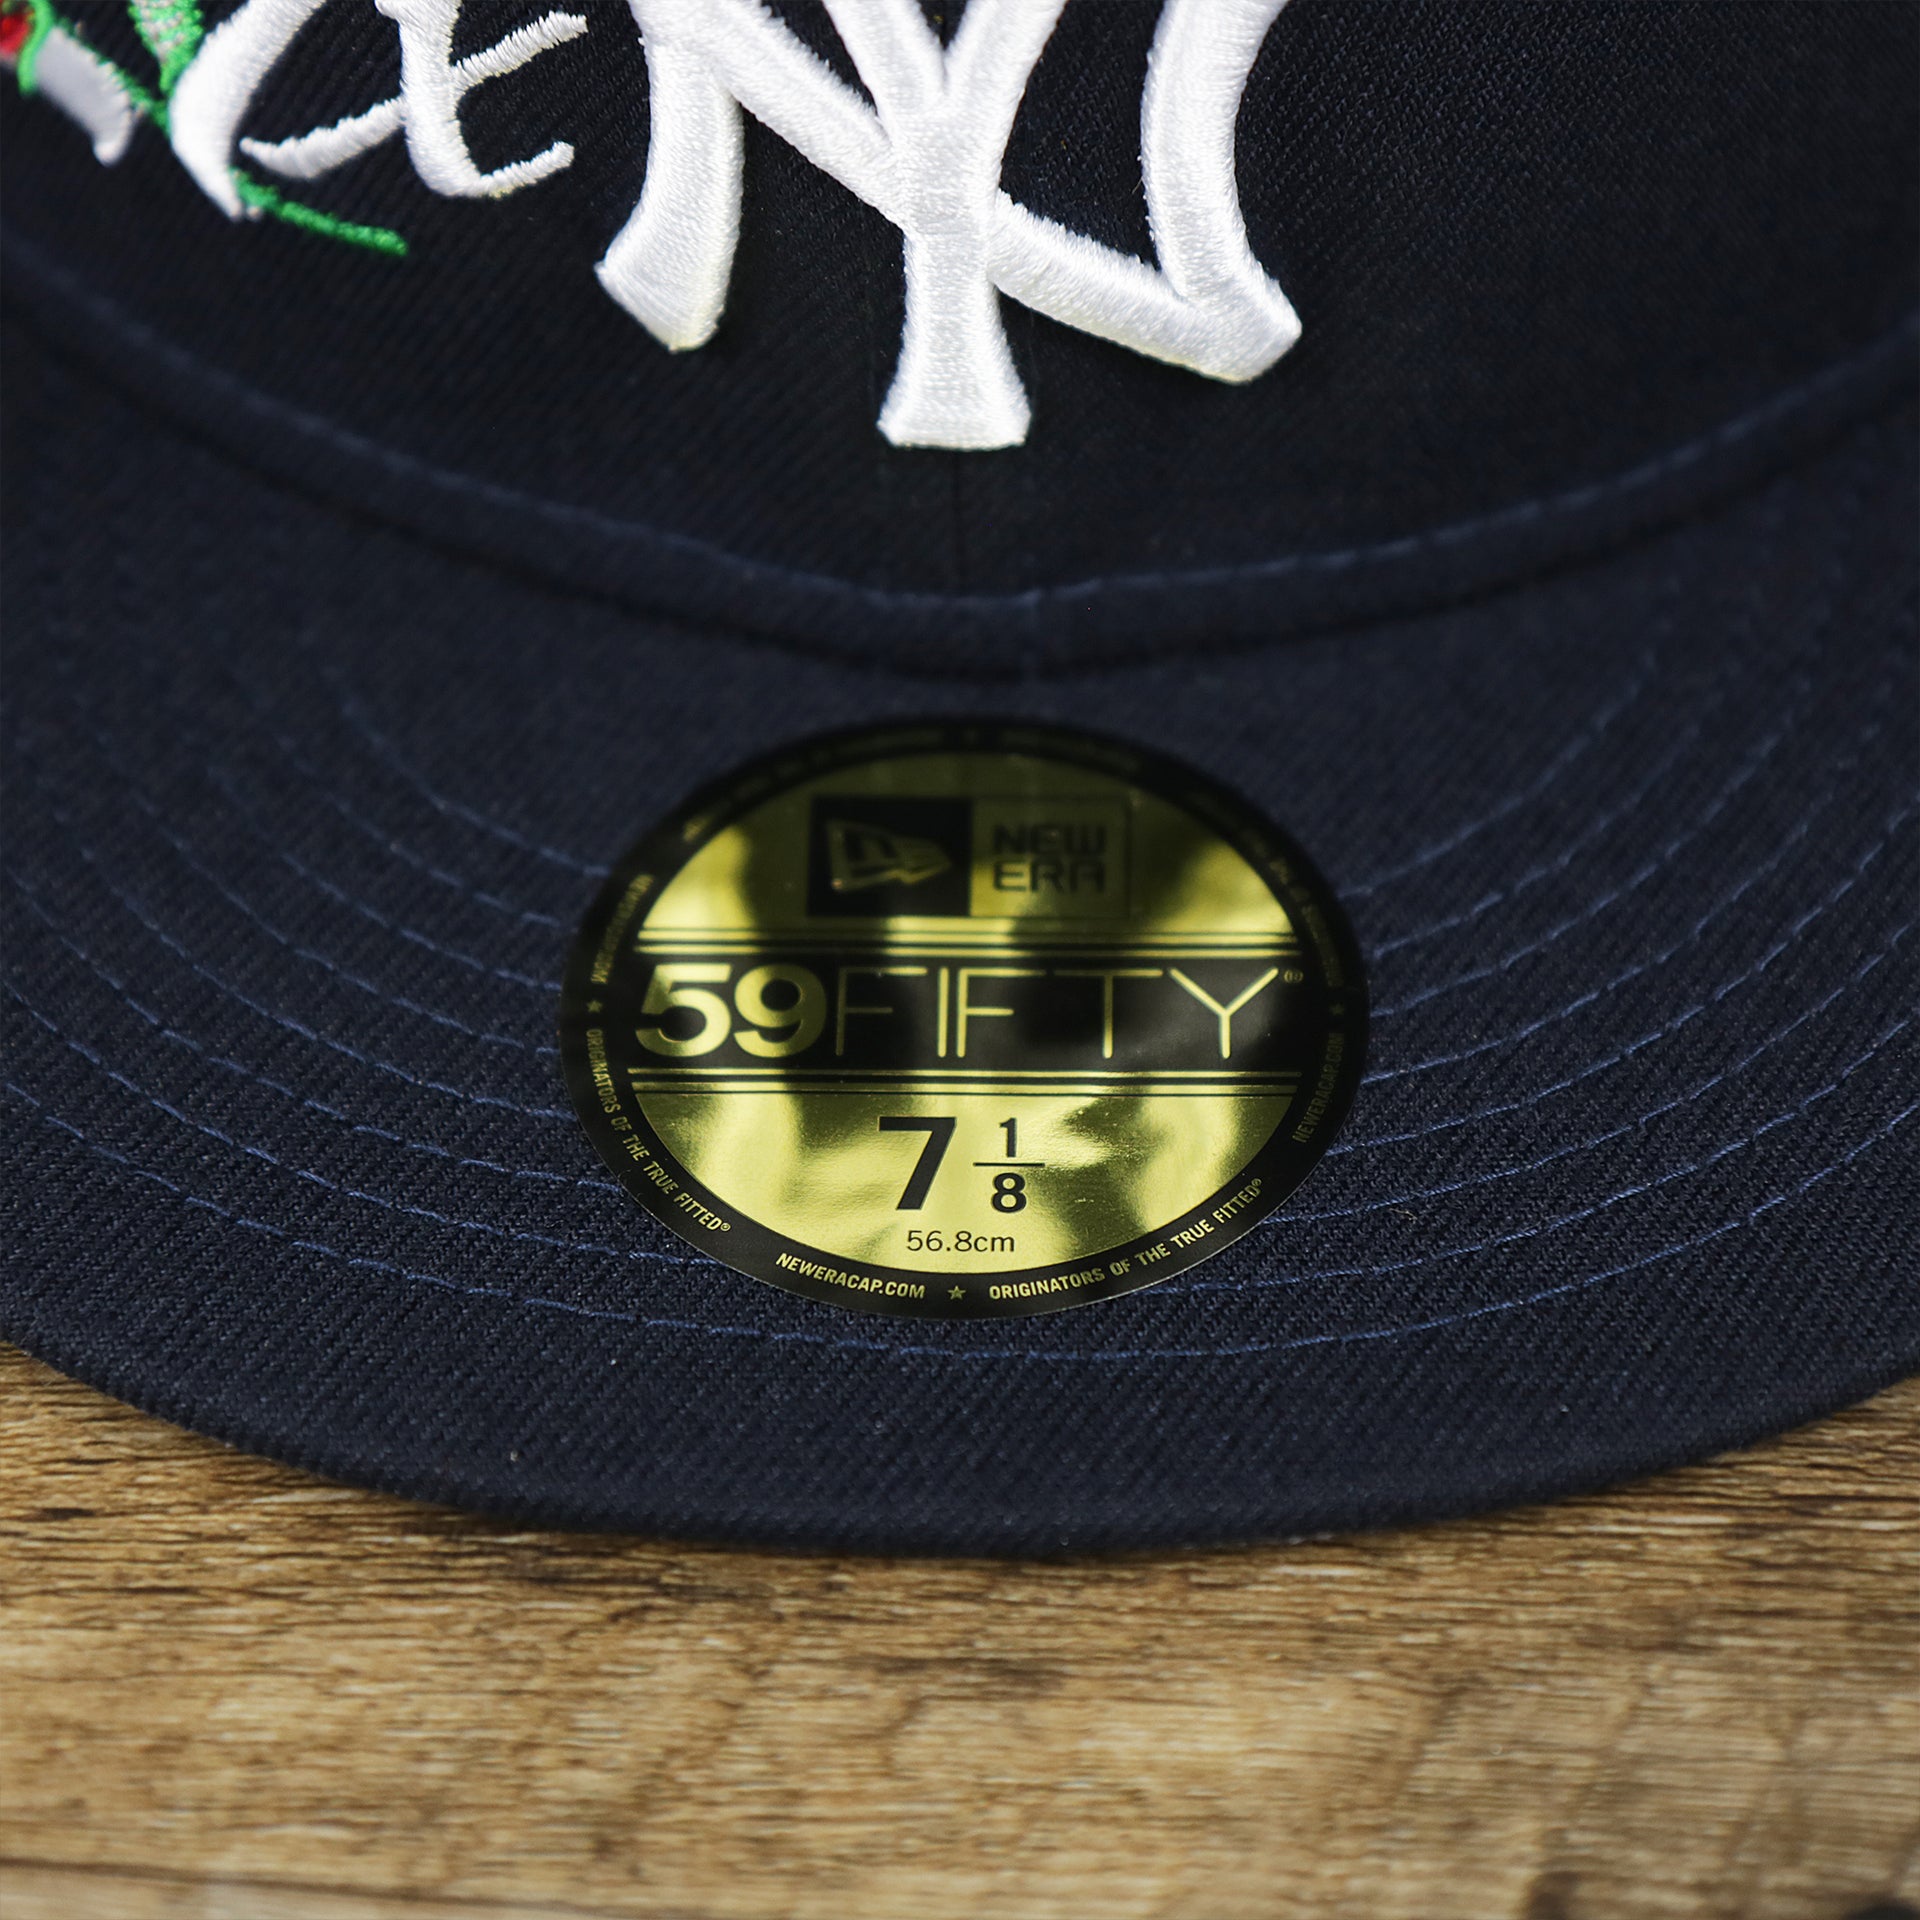 The 59Fifty Sticker on the New York Yankees Crown Champions Gray Bottom World Championship Wins Embroidered Fitted Cap | Navy Blue 59Fifty Cap